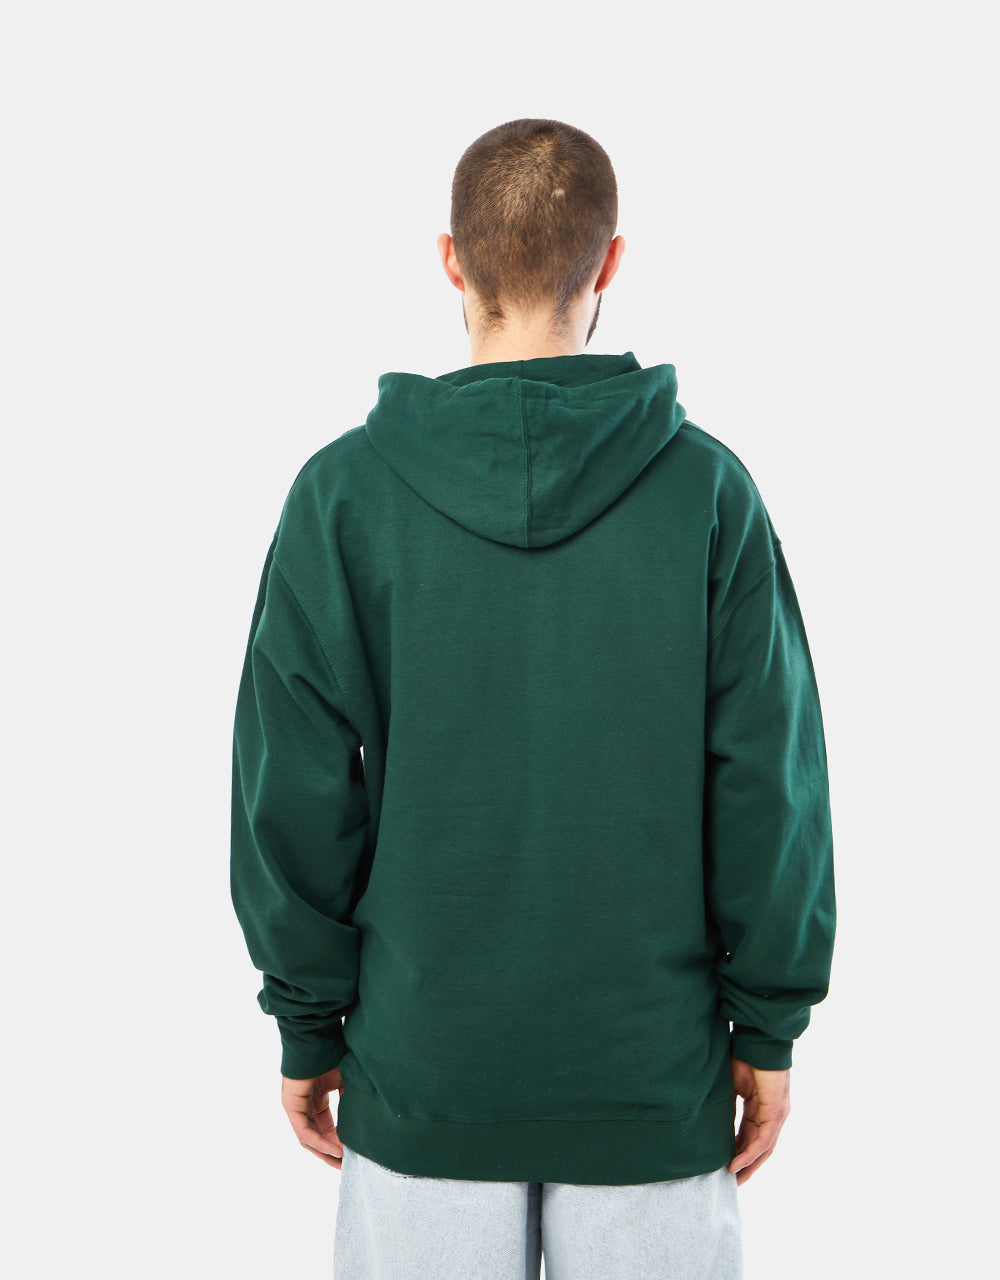 The Quiet Life Butterfly Pullover Hoodie - Hunter Green